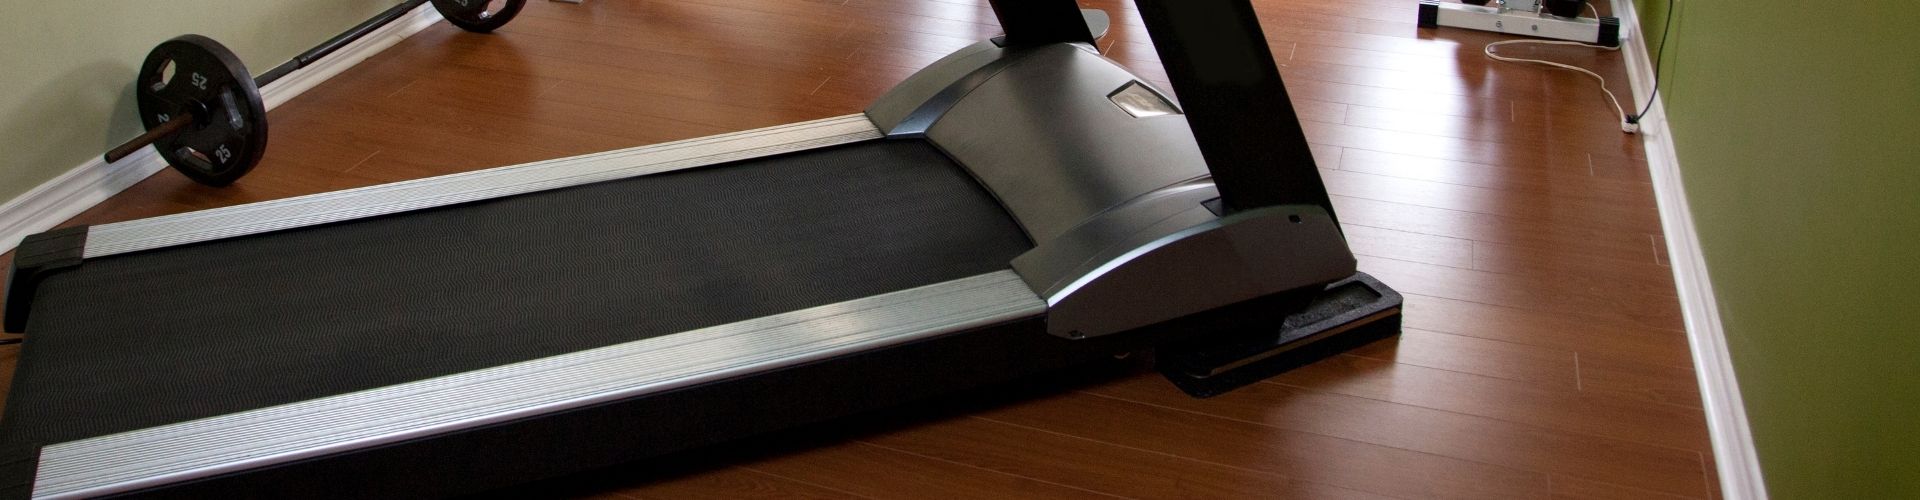 best compact treadmill for home